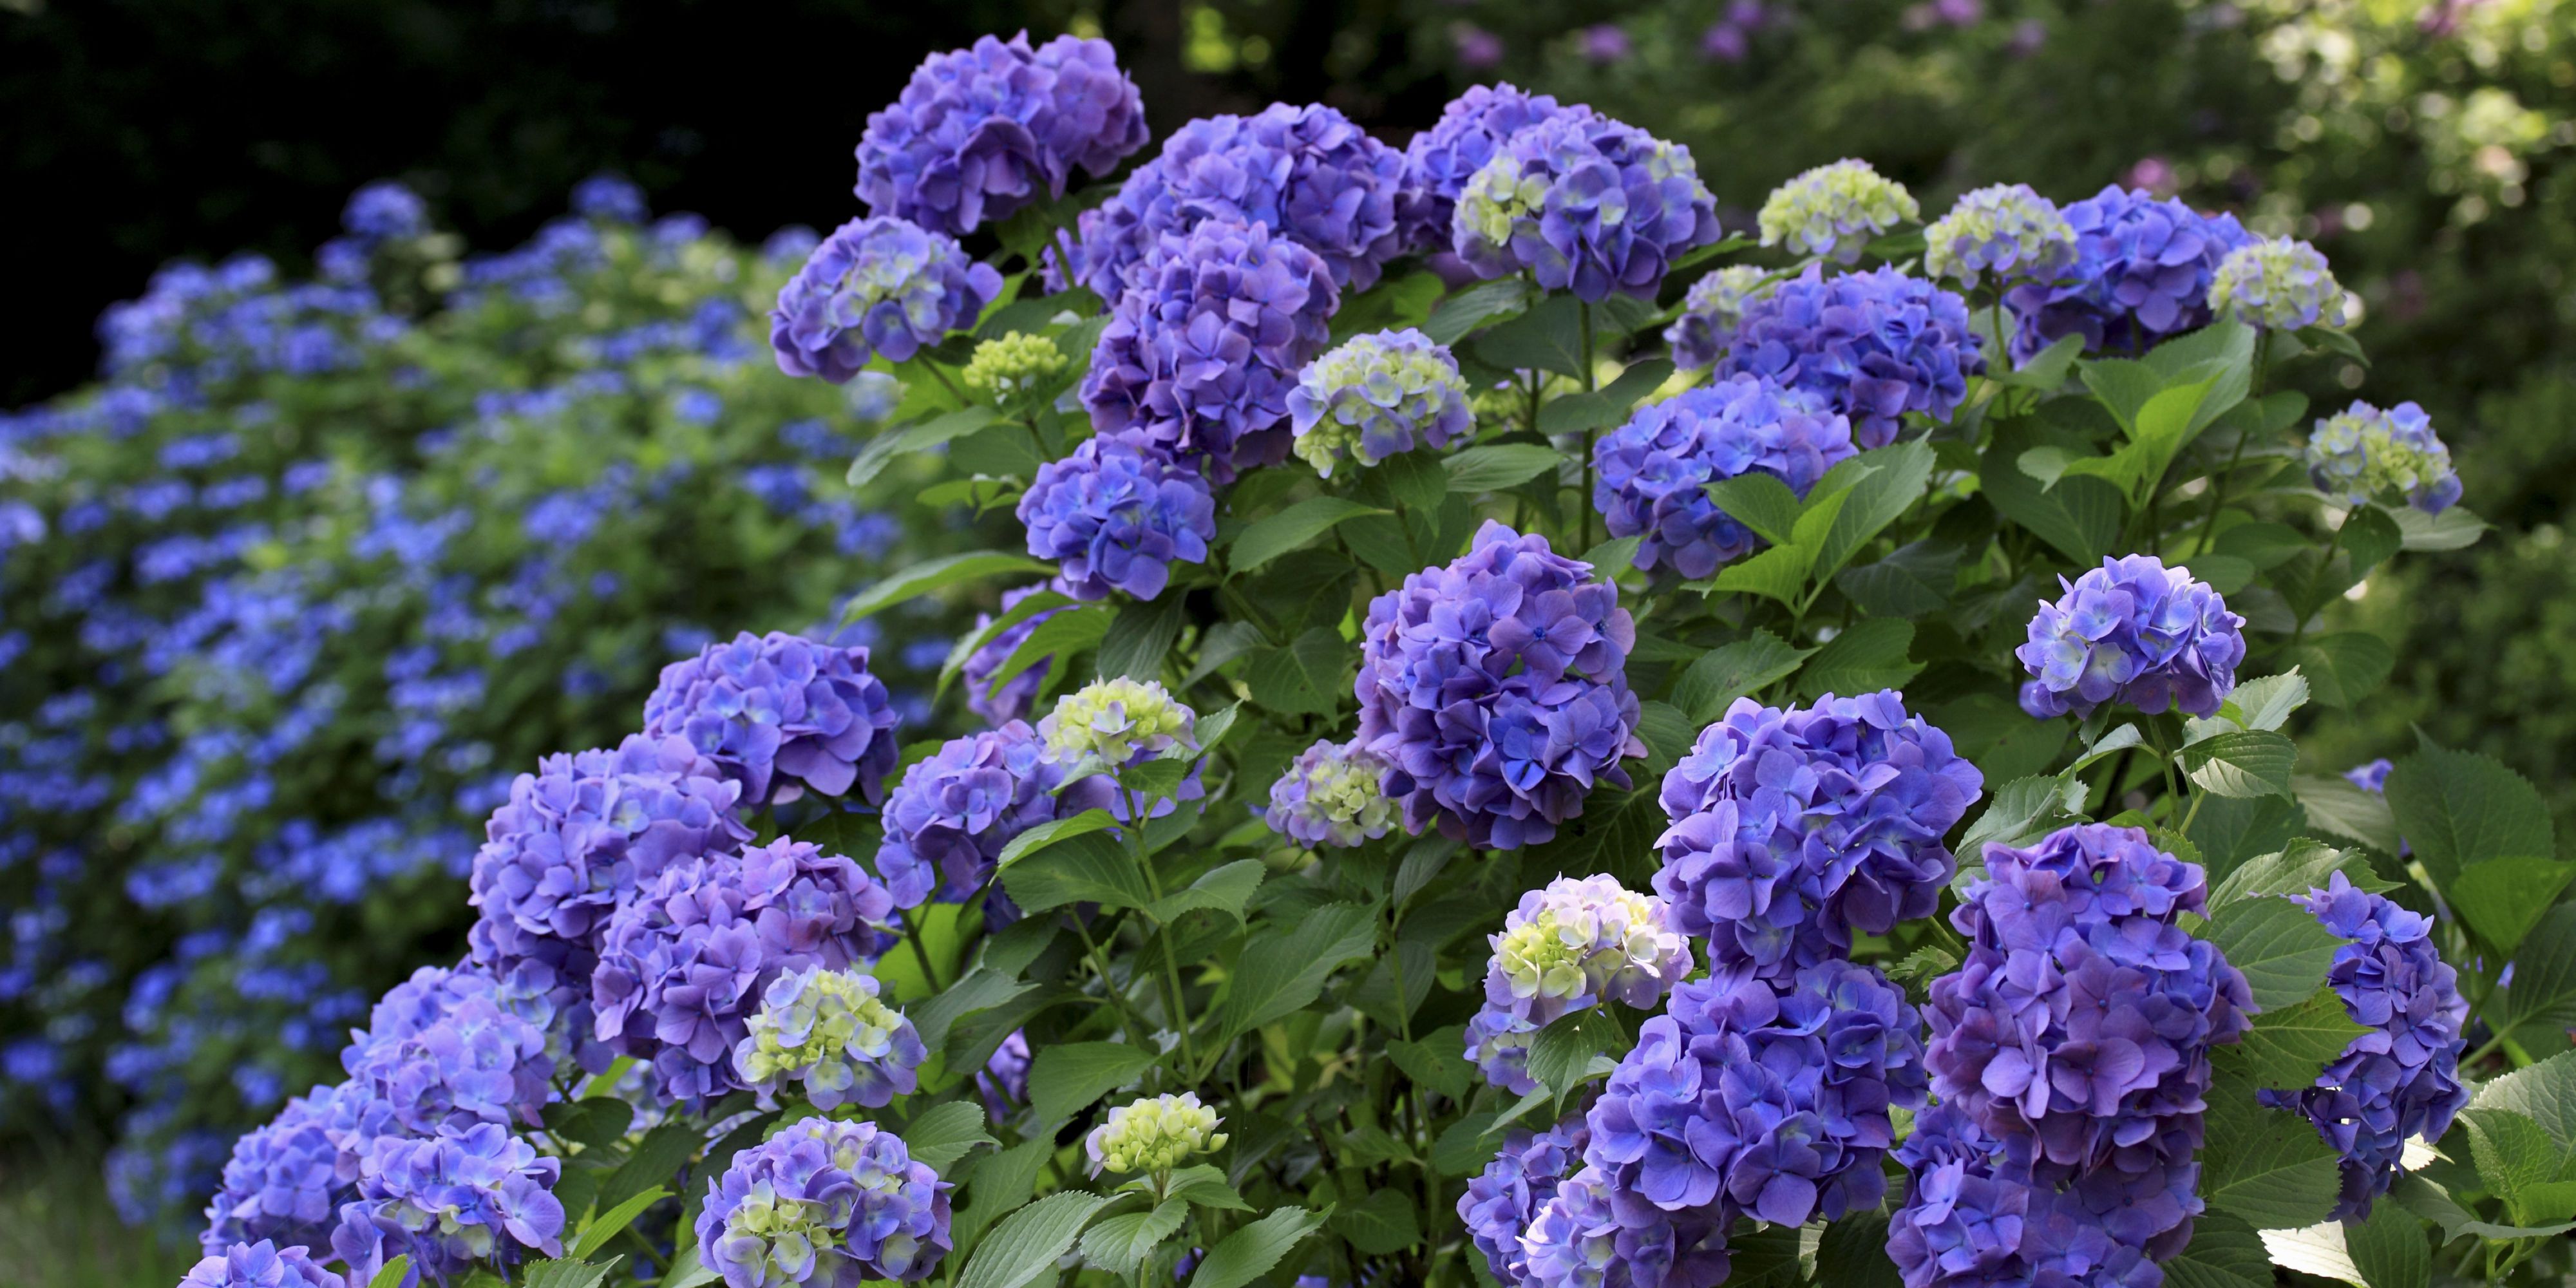 is hydrangea poisonous for dogs